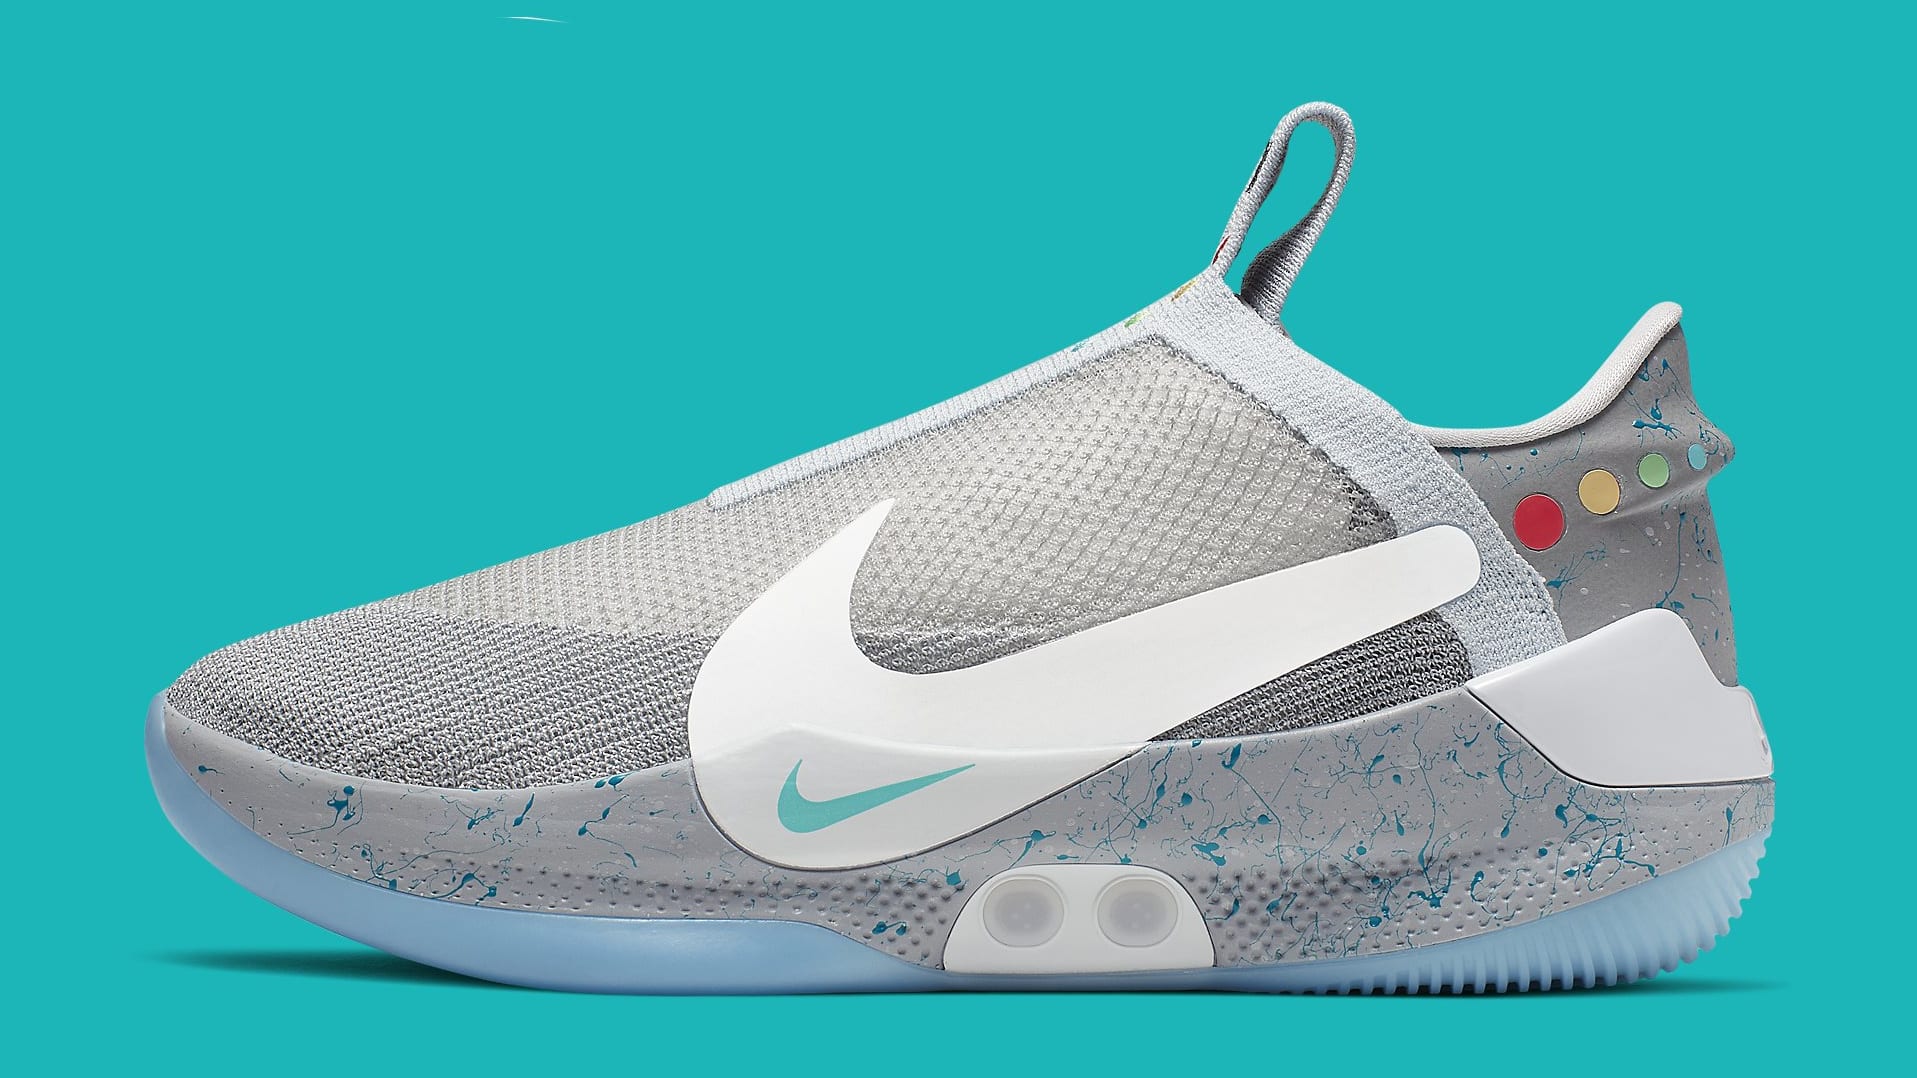 nike-adapt-bb-wolf-grey-wolf-grey-multi-color-ao2582-001-lateral.jpg